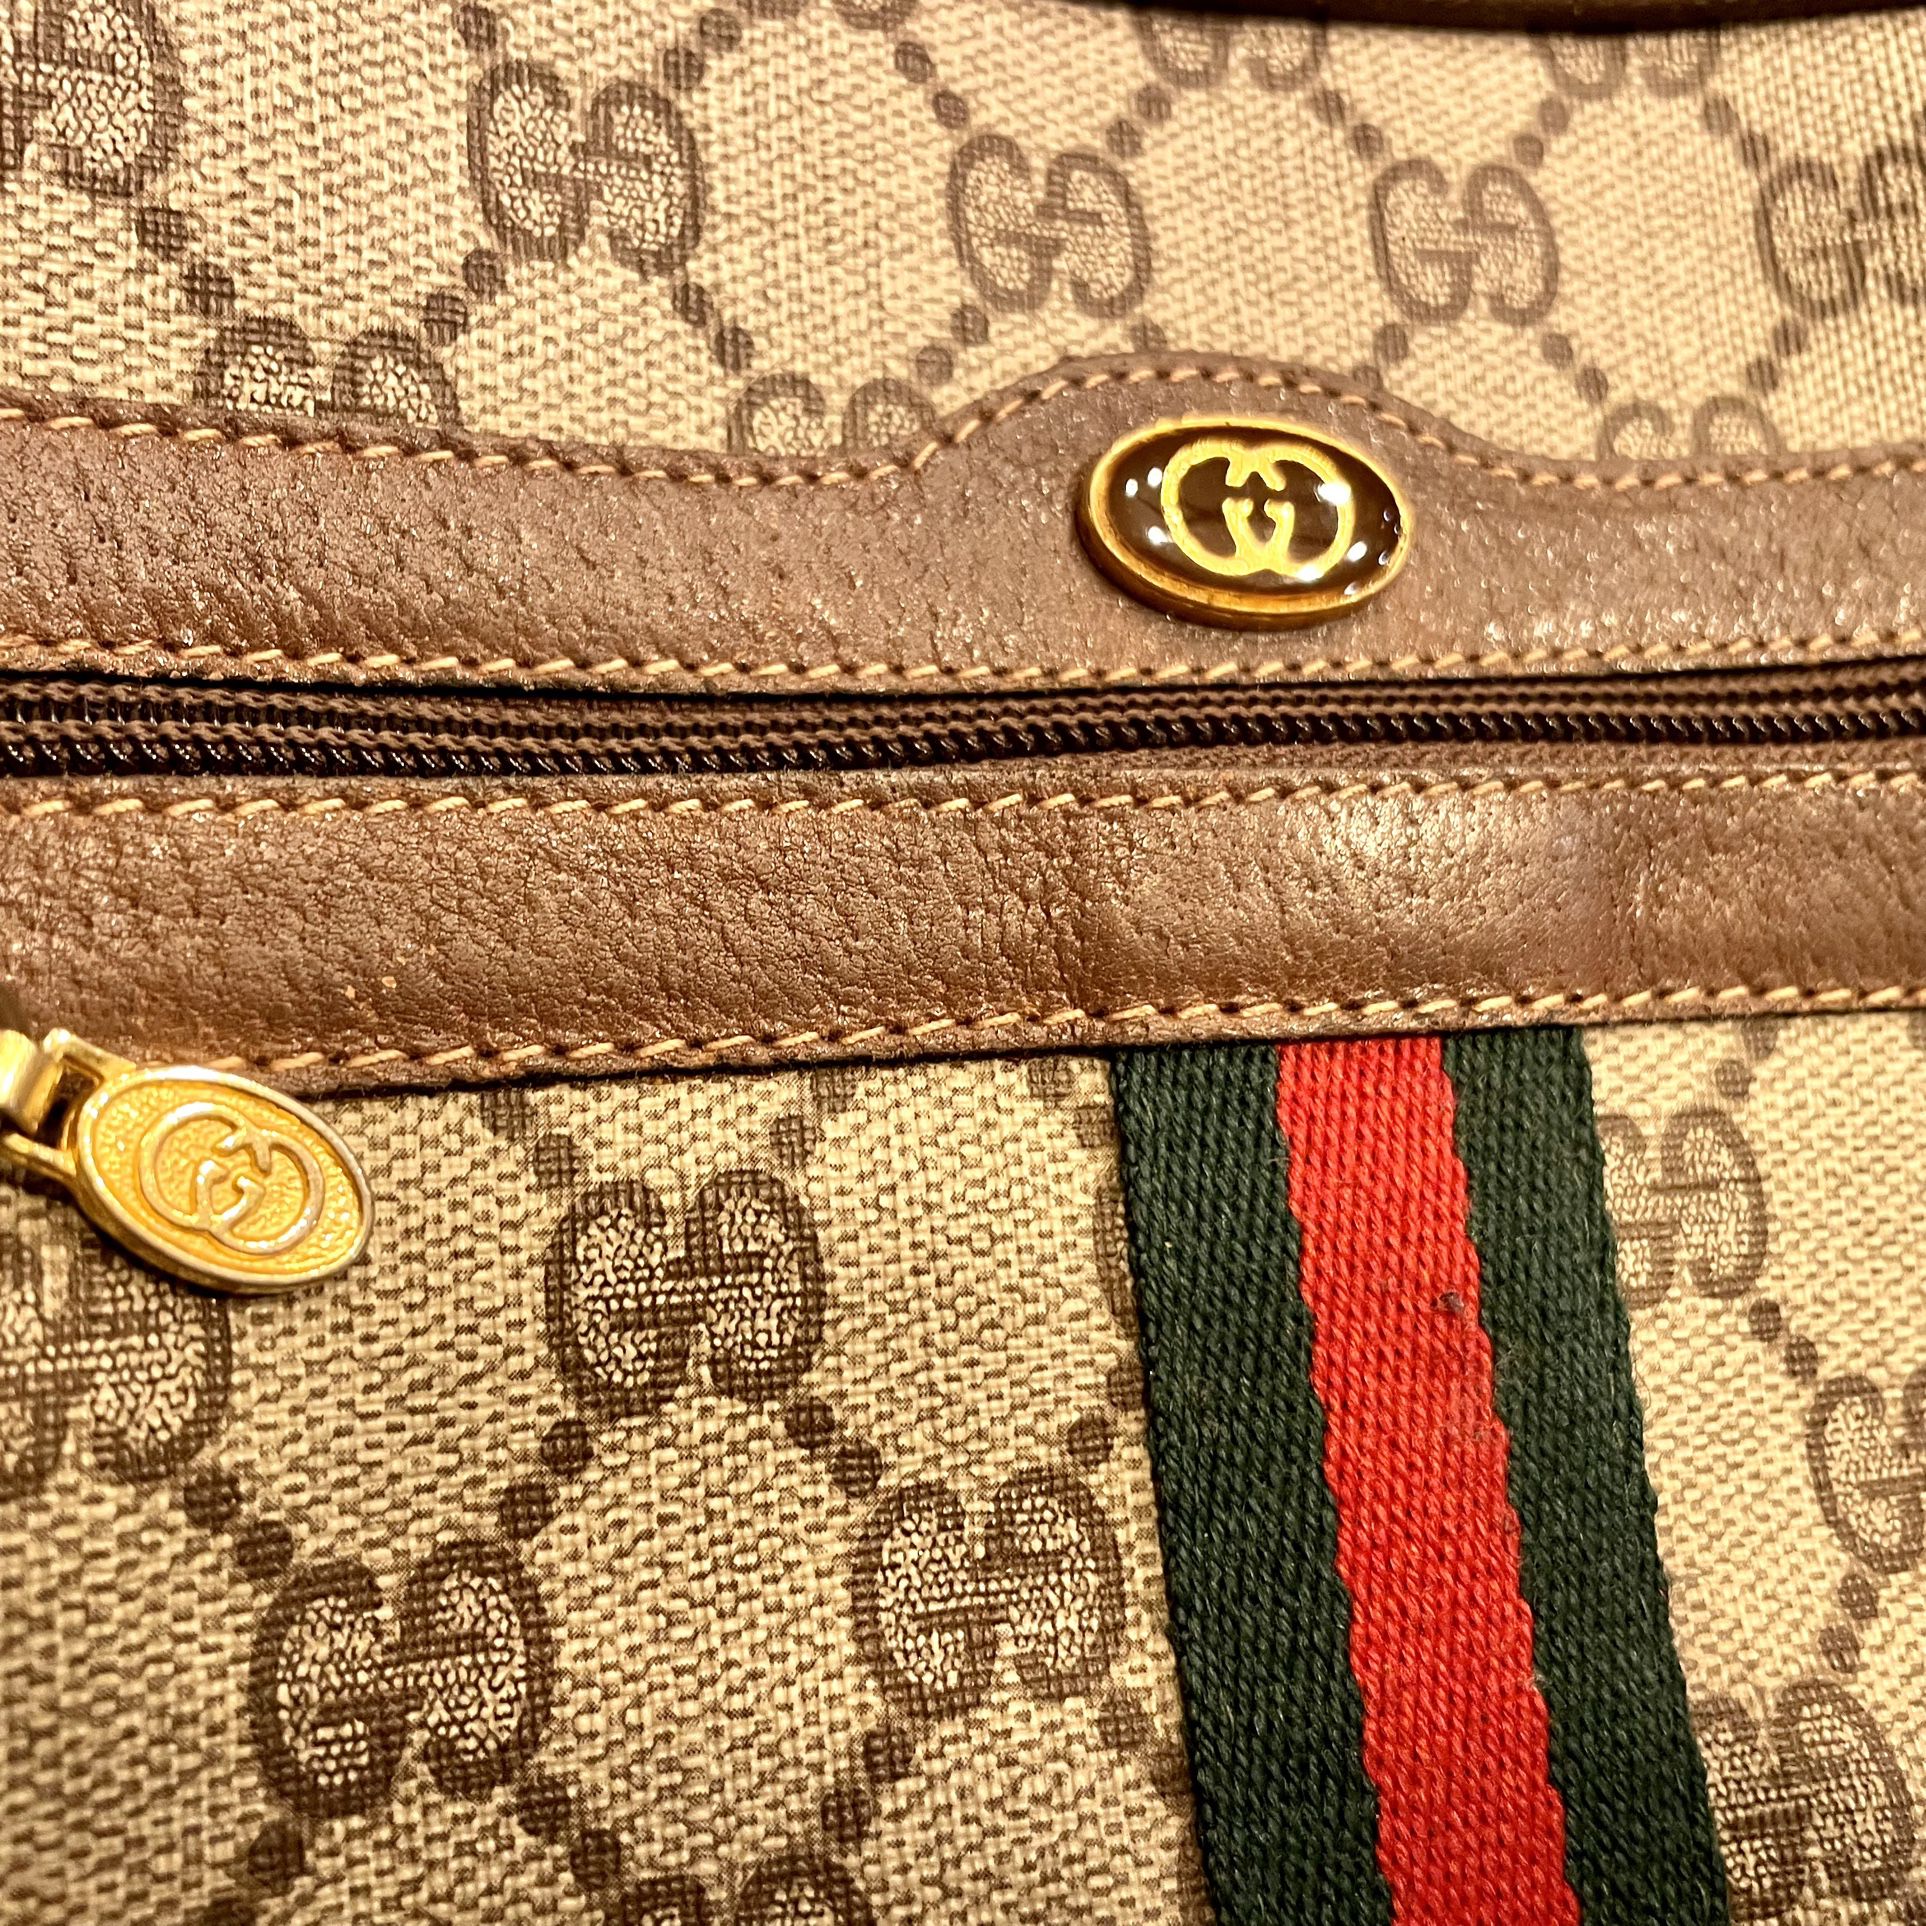 Authentic Gucci Handbag - Red Accent for Sale in Morrow, GA - OfferUp